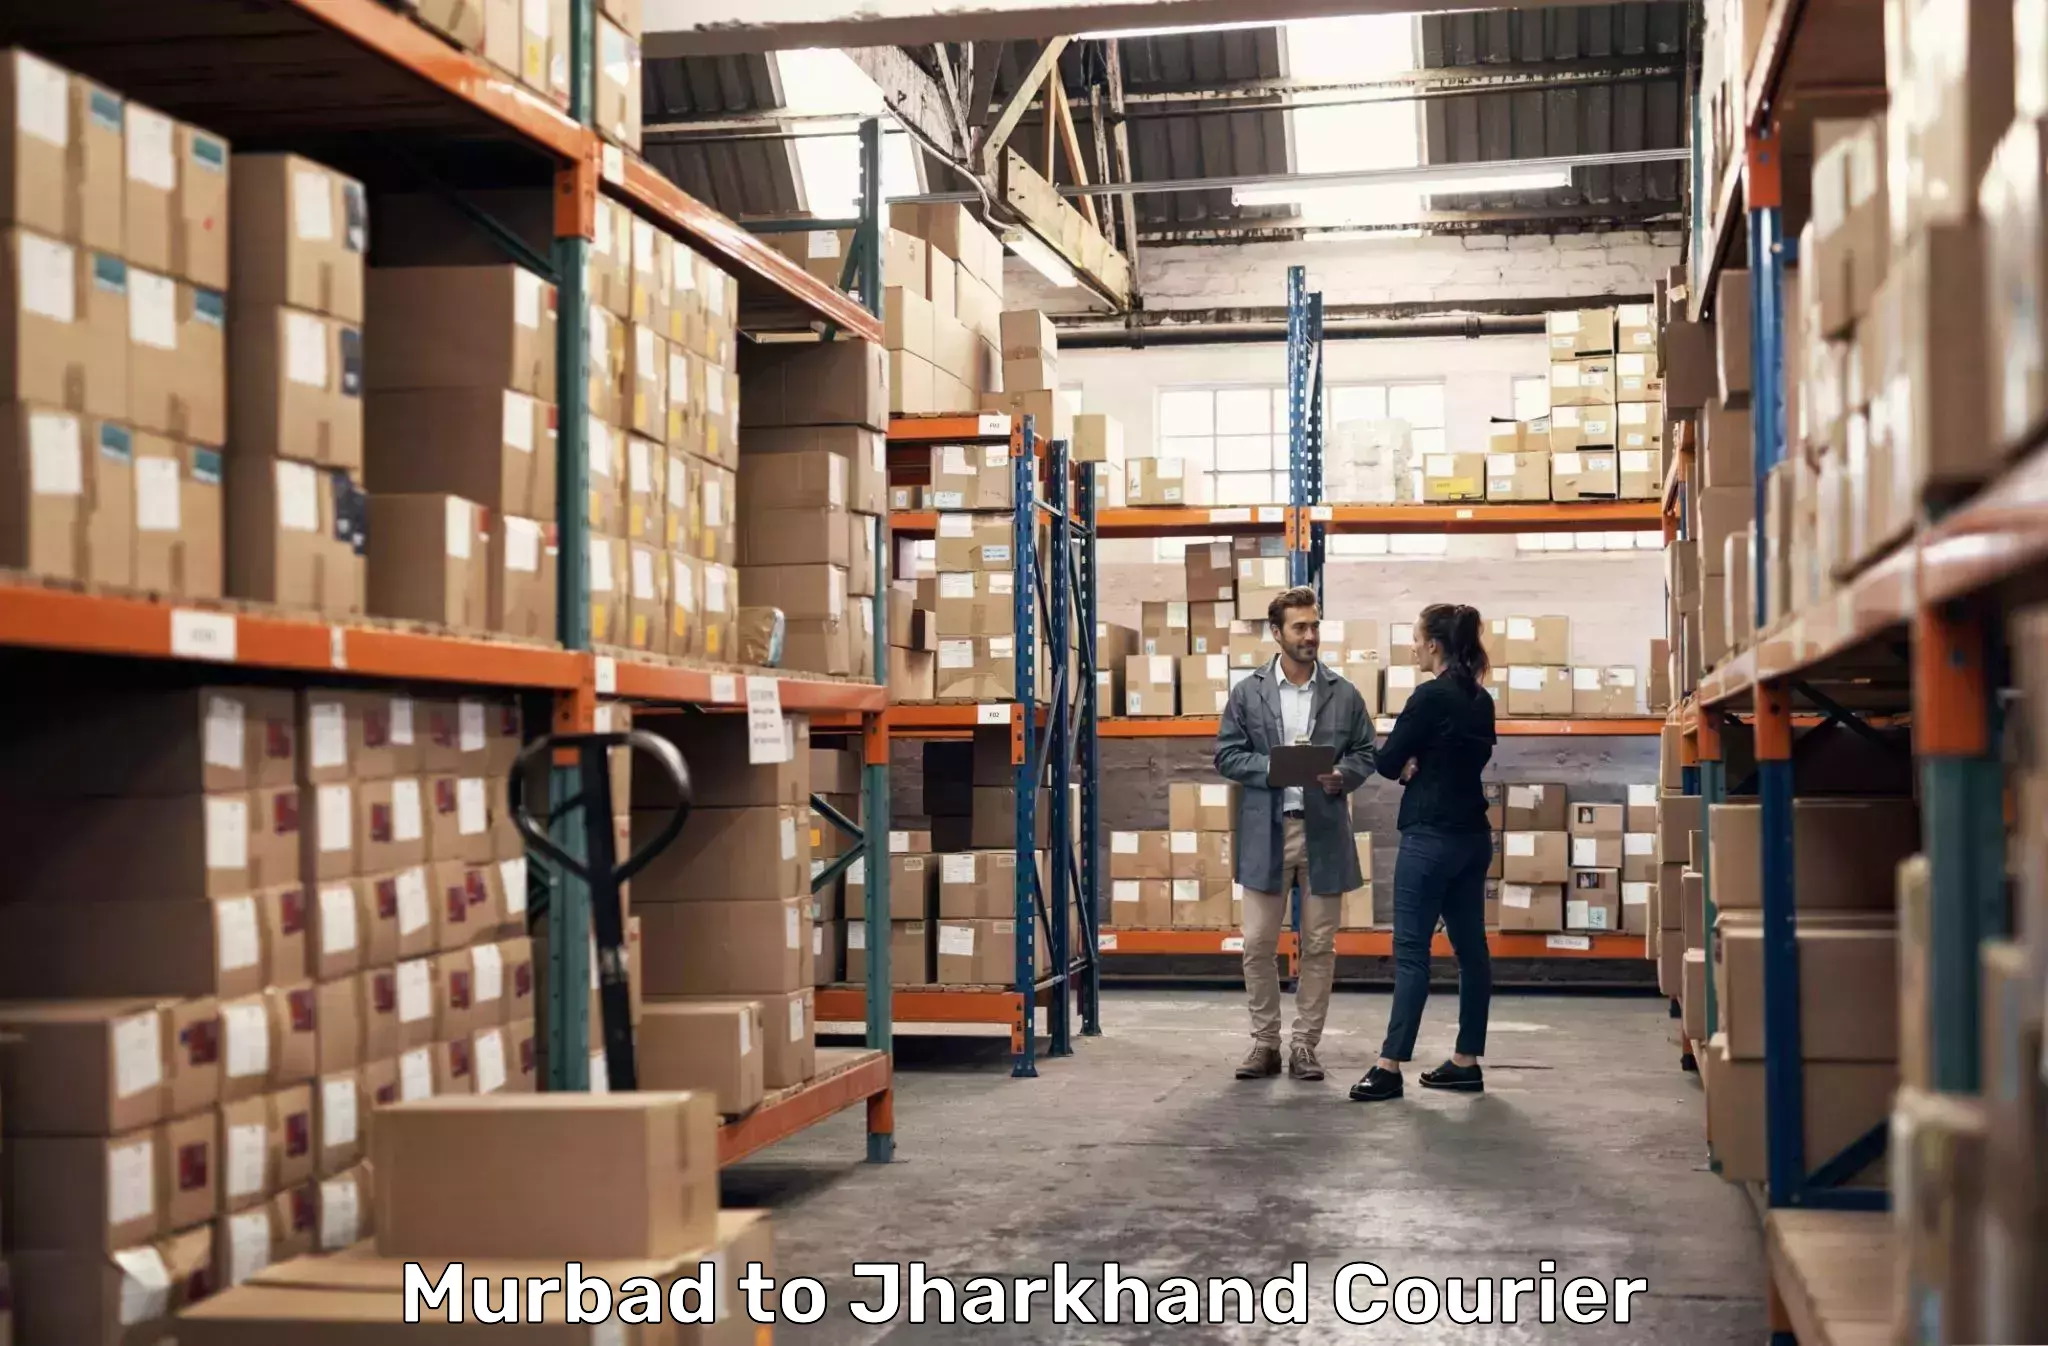 Courier service innovation Murbad to Jharkhand